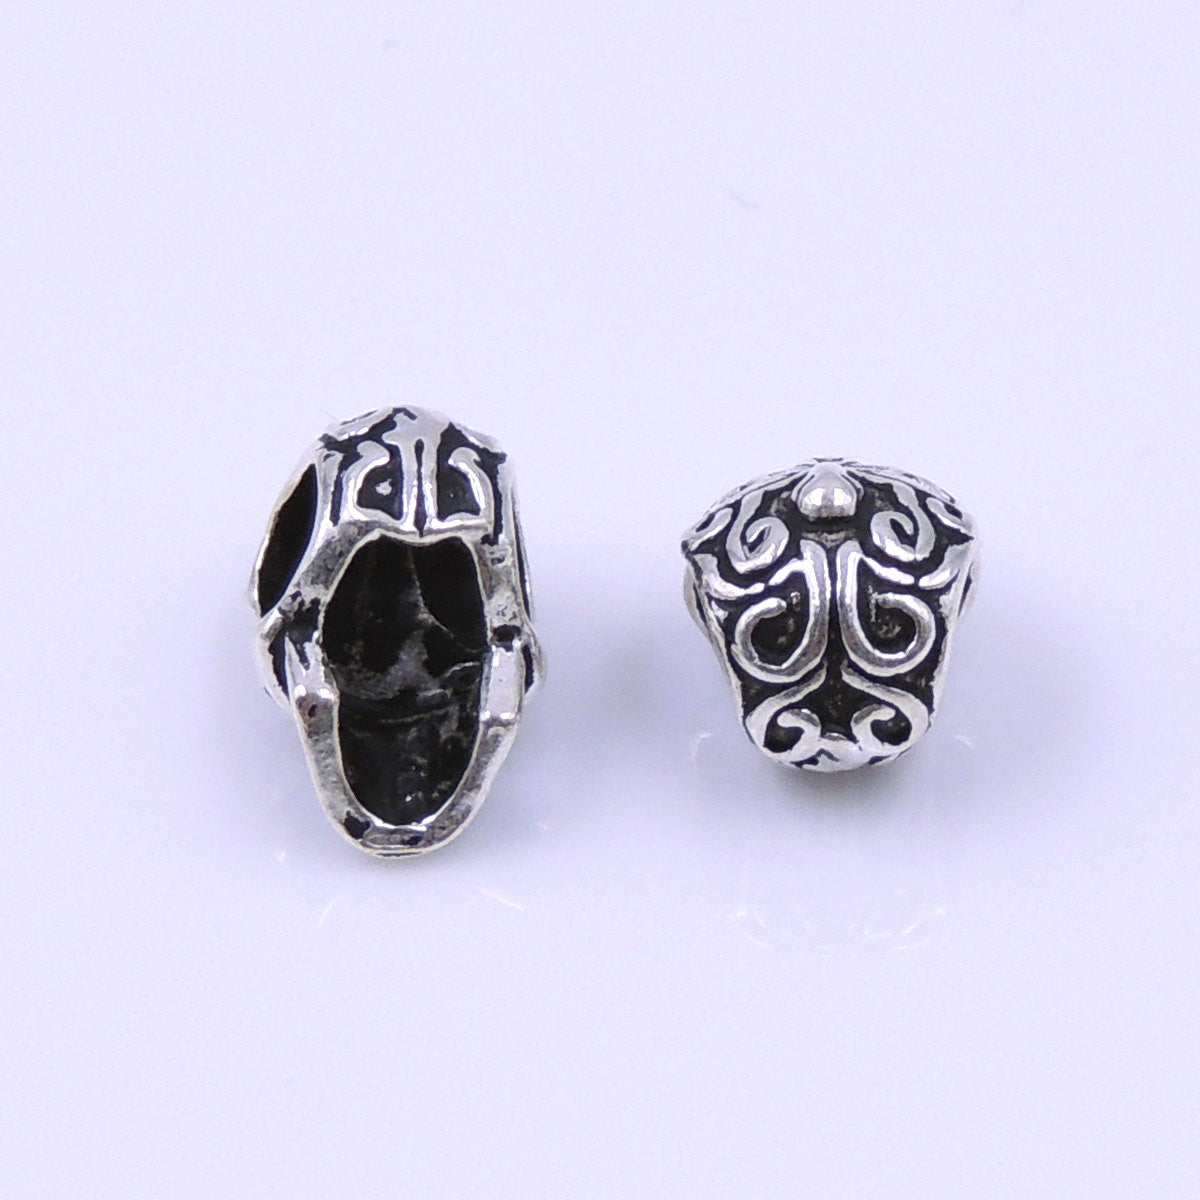 4 PCS Day of the Dead Inspired Tribute Skulls - S925 Sterling Silver WSP211X4